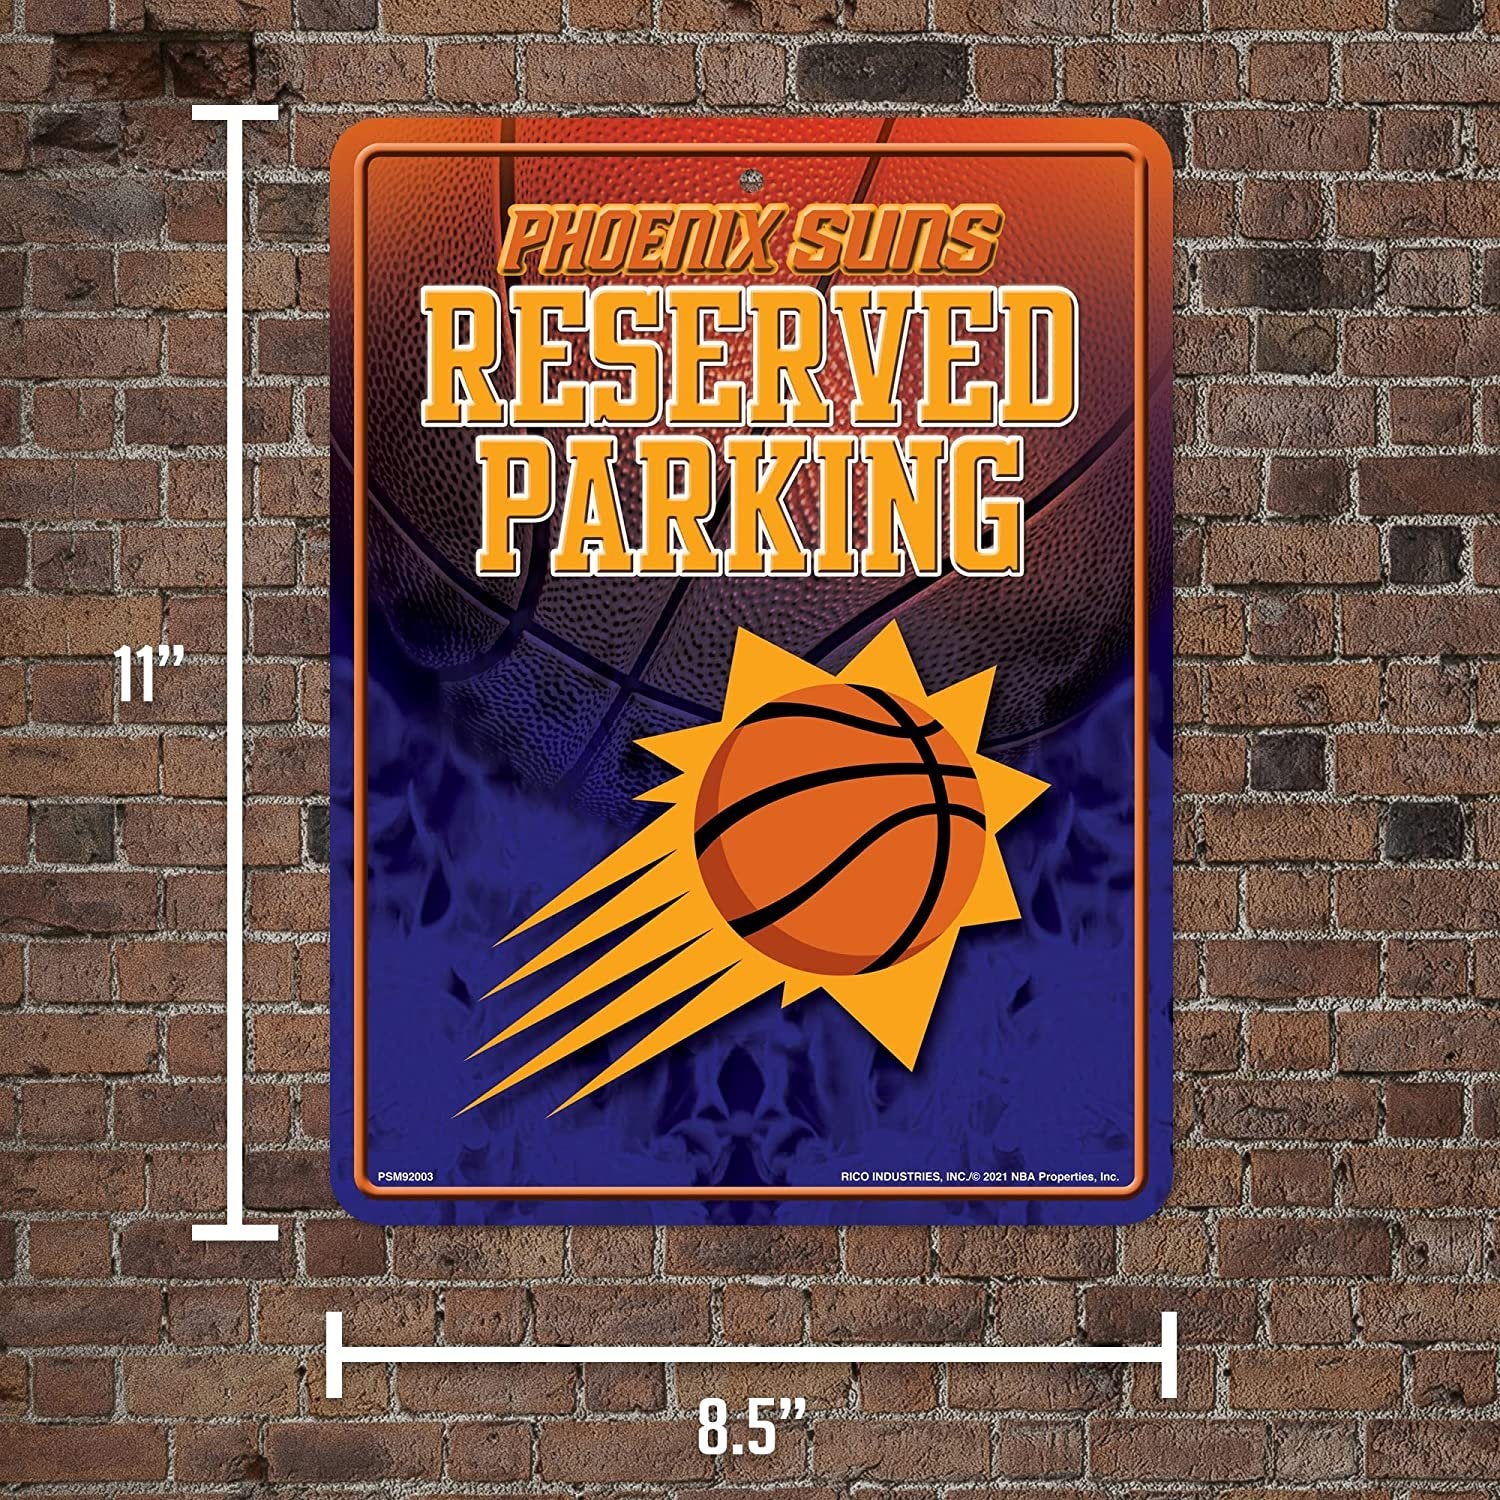 Rico Industries NBA Phoenix Suns 8.5" x 11" Metal Parking Sign - Great for Man Cave, Bed Room, Office, Home Décor